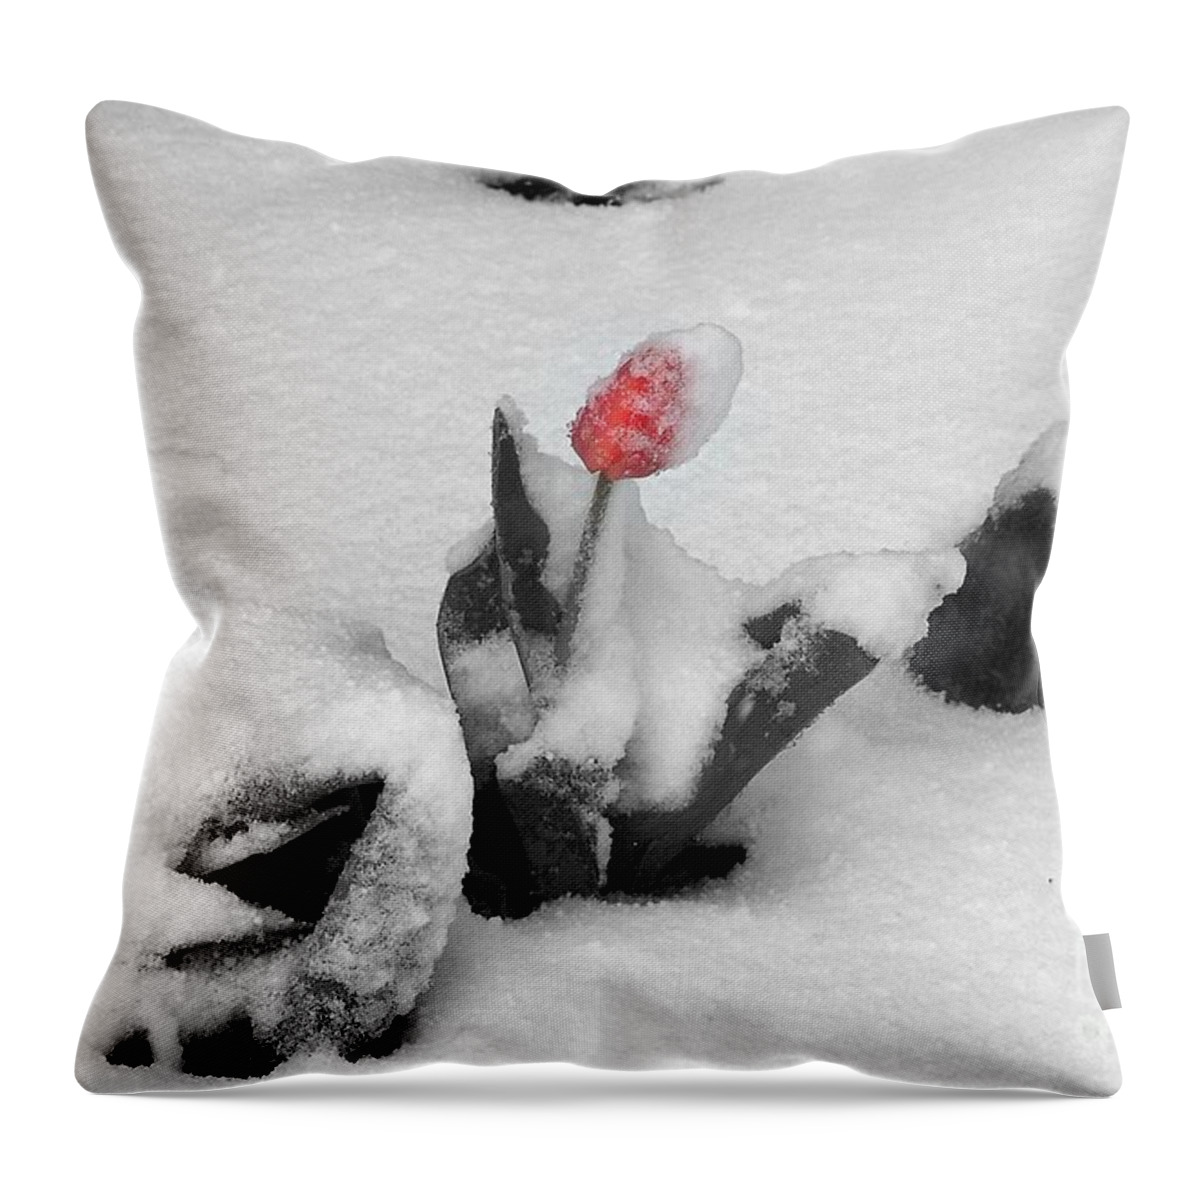 Tulips Throw Pillow featuring the photograph Frosted Pink by Dorrene BrownButterfield